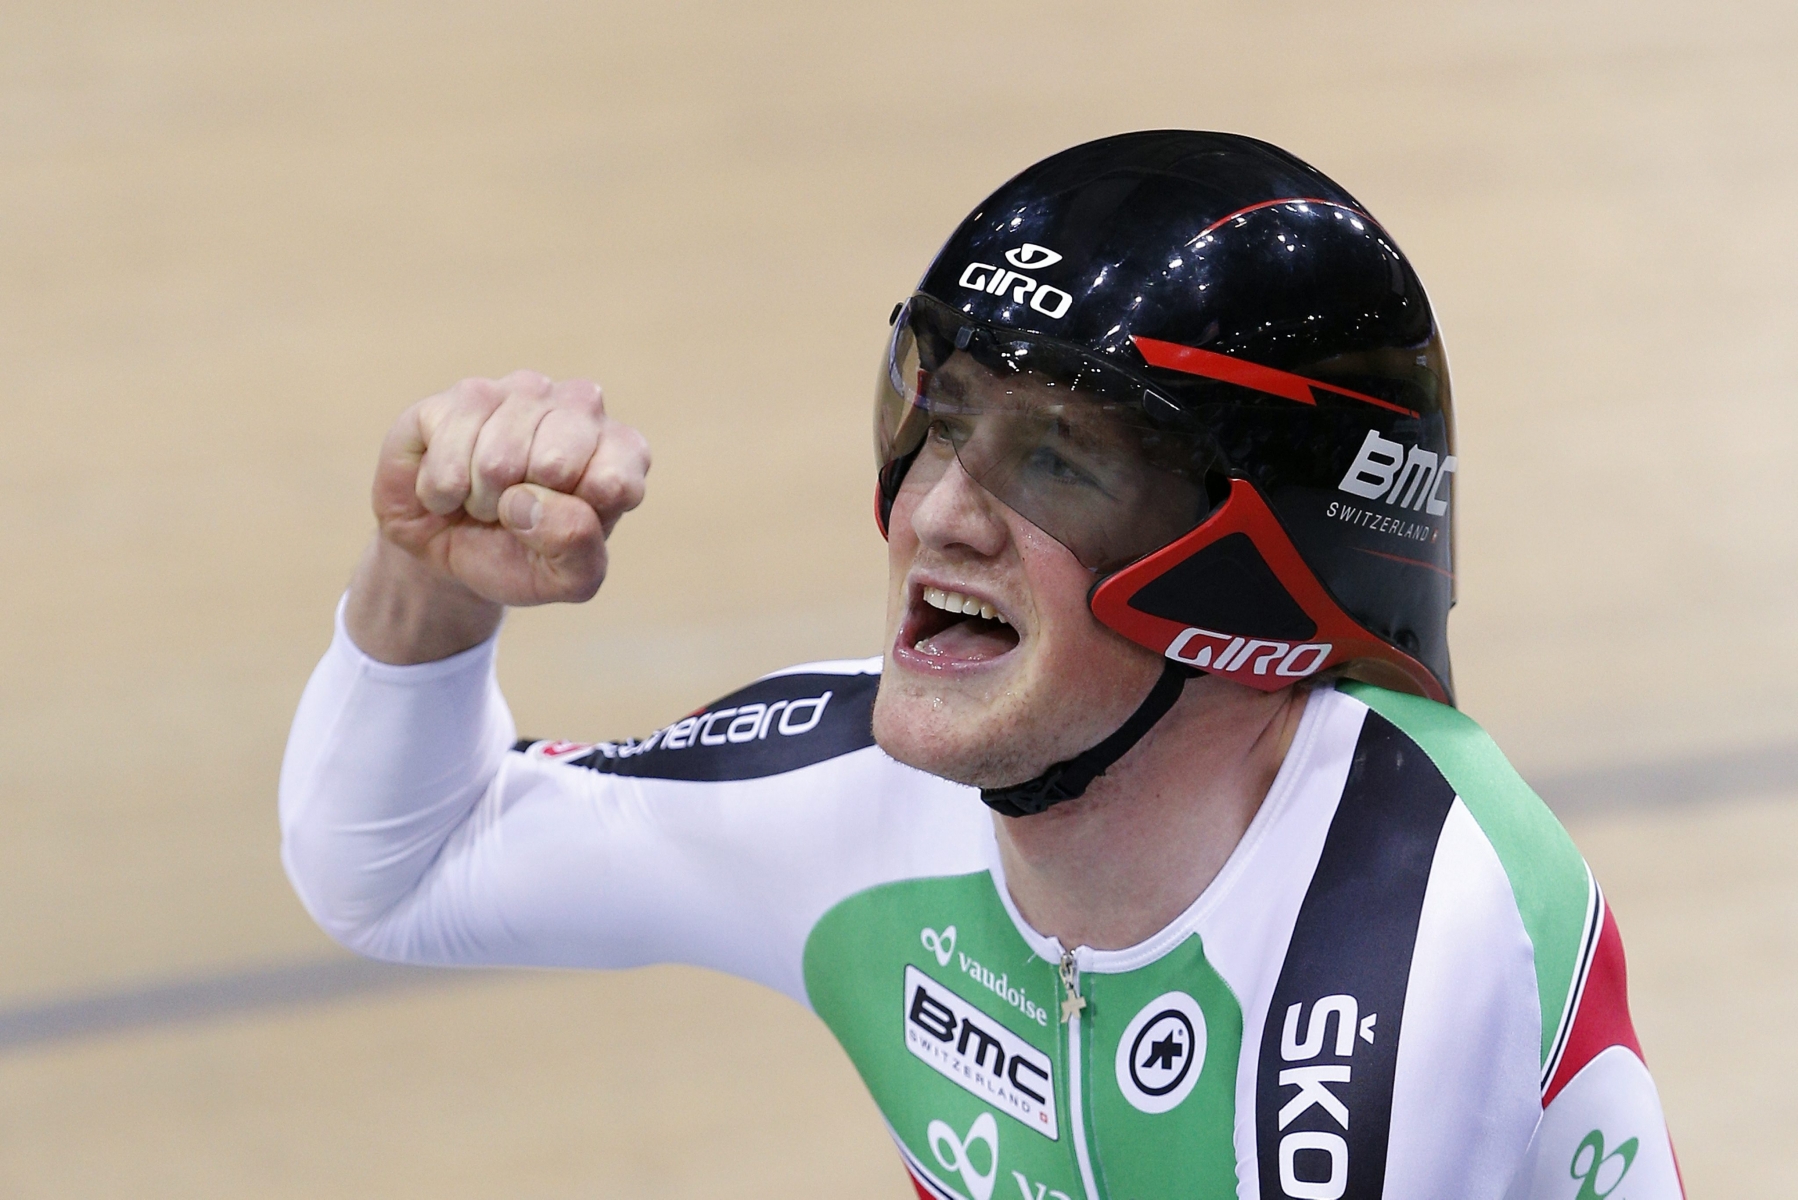 epa04631391 Stefan Kueng of Switzerland celebrates after winning the Men's Individual Pursuit final at the 2015 UCI Track Cycling World Championships, in Saint-Quentin-en-Yvelines, France, 21 February 2015. The competition runs from 18 to 22 February 2015.  EPA/YOAN VALAT